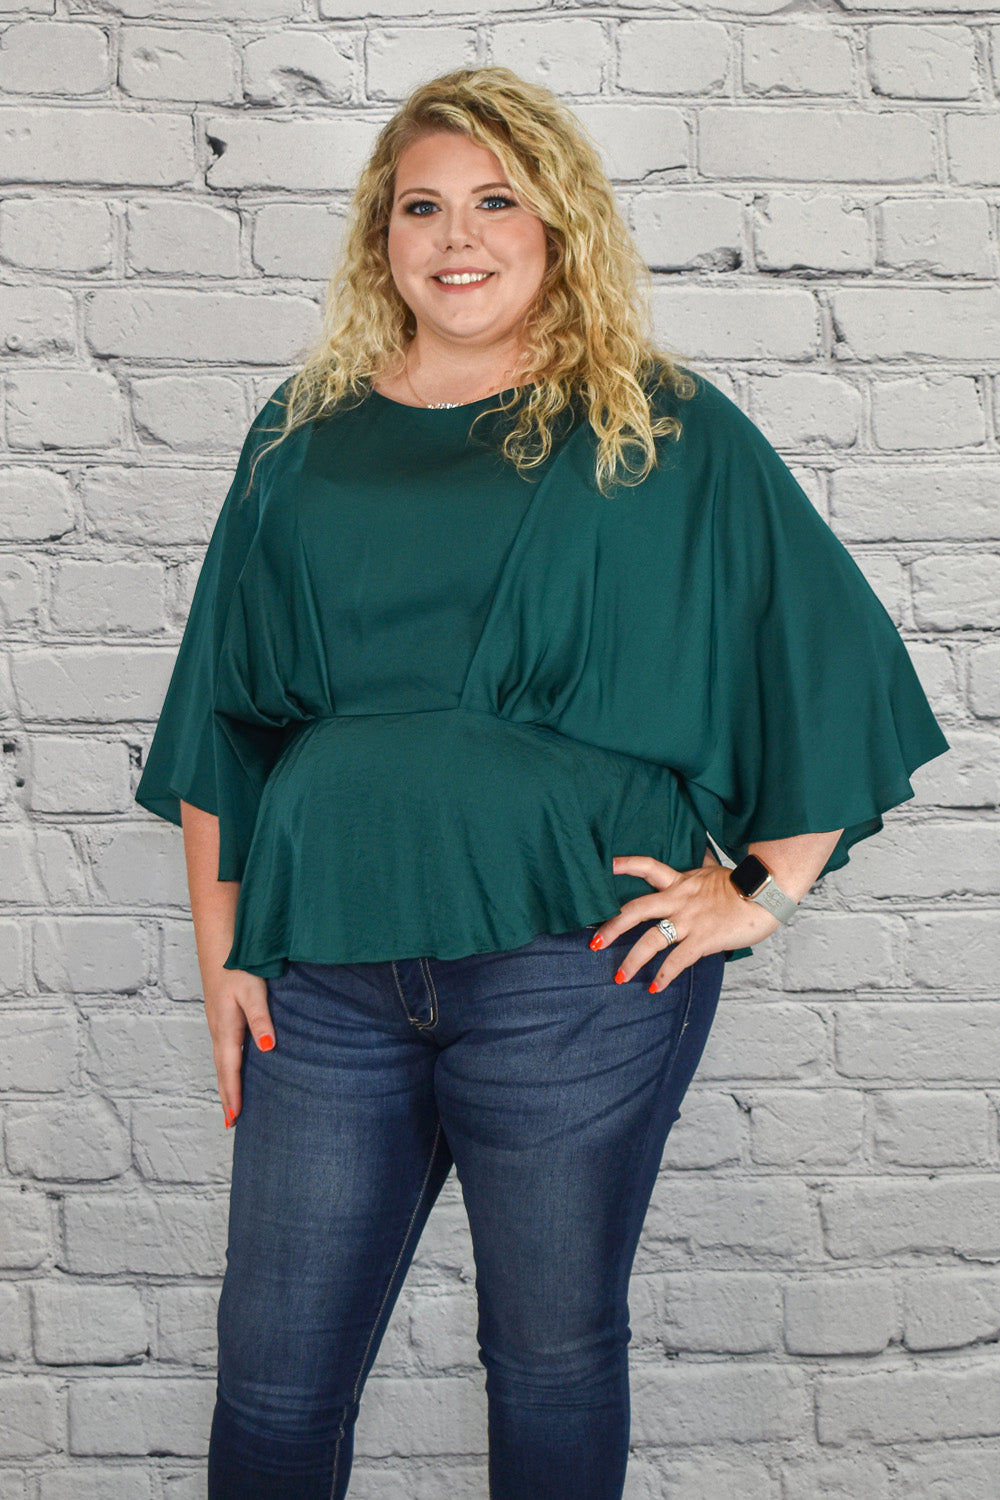 Pleated Satin Peplum Top with Kimono Sleeves in Plus Size by Umgee Clothing